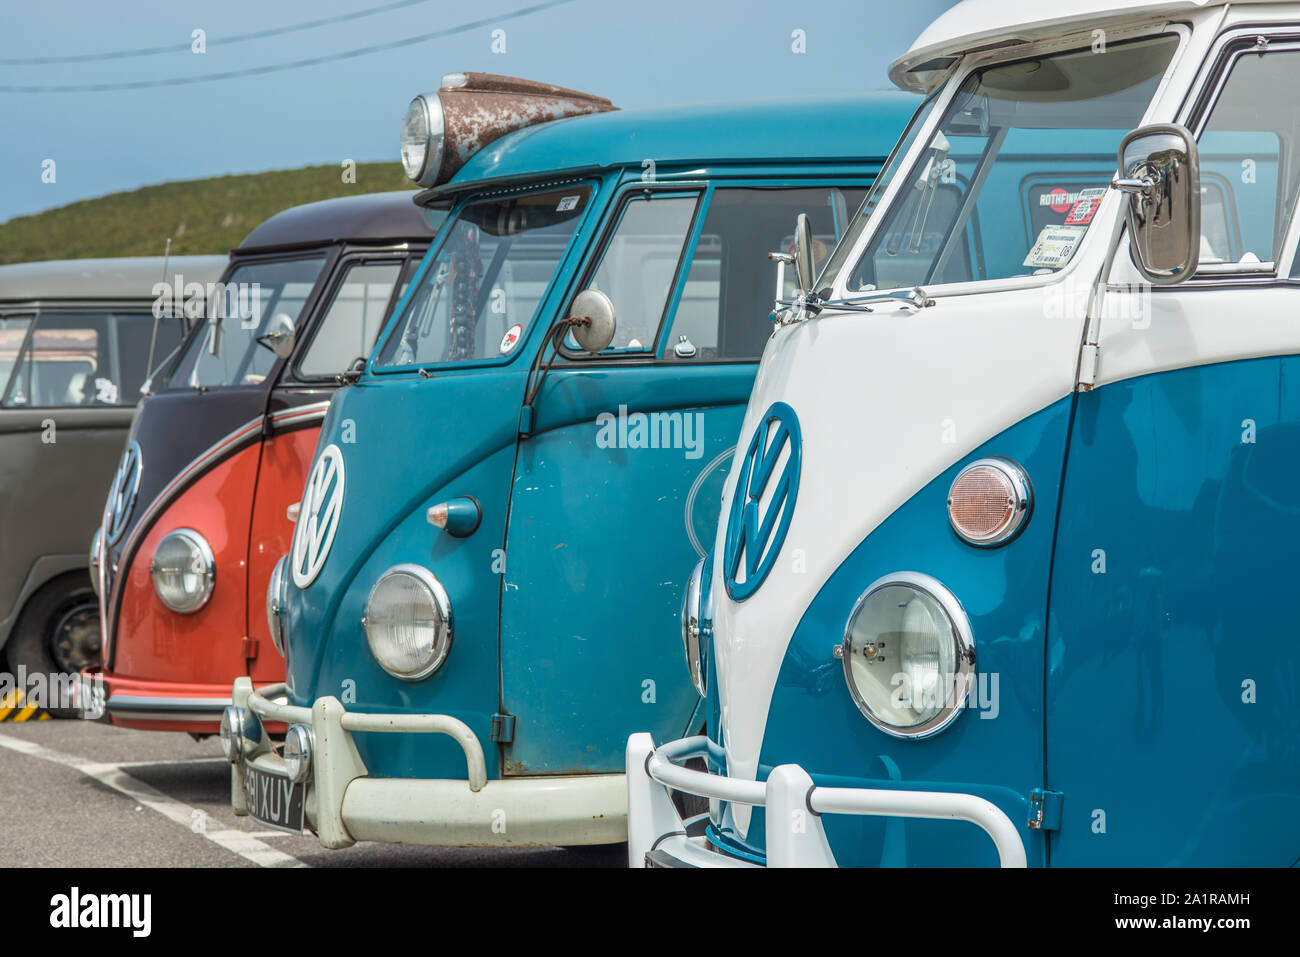 Rows of Classic Volkswagen Campervans parked at Porthtowan beach carpark on the west Cornwall coast, England, UK. Stock Photo